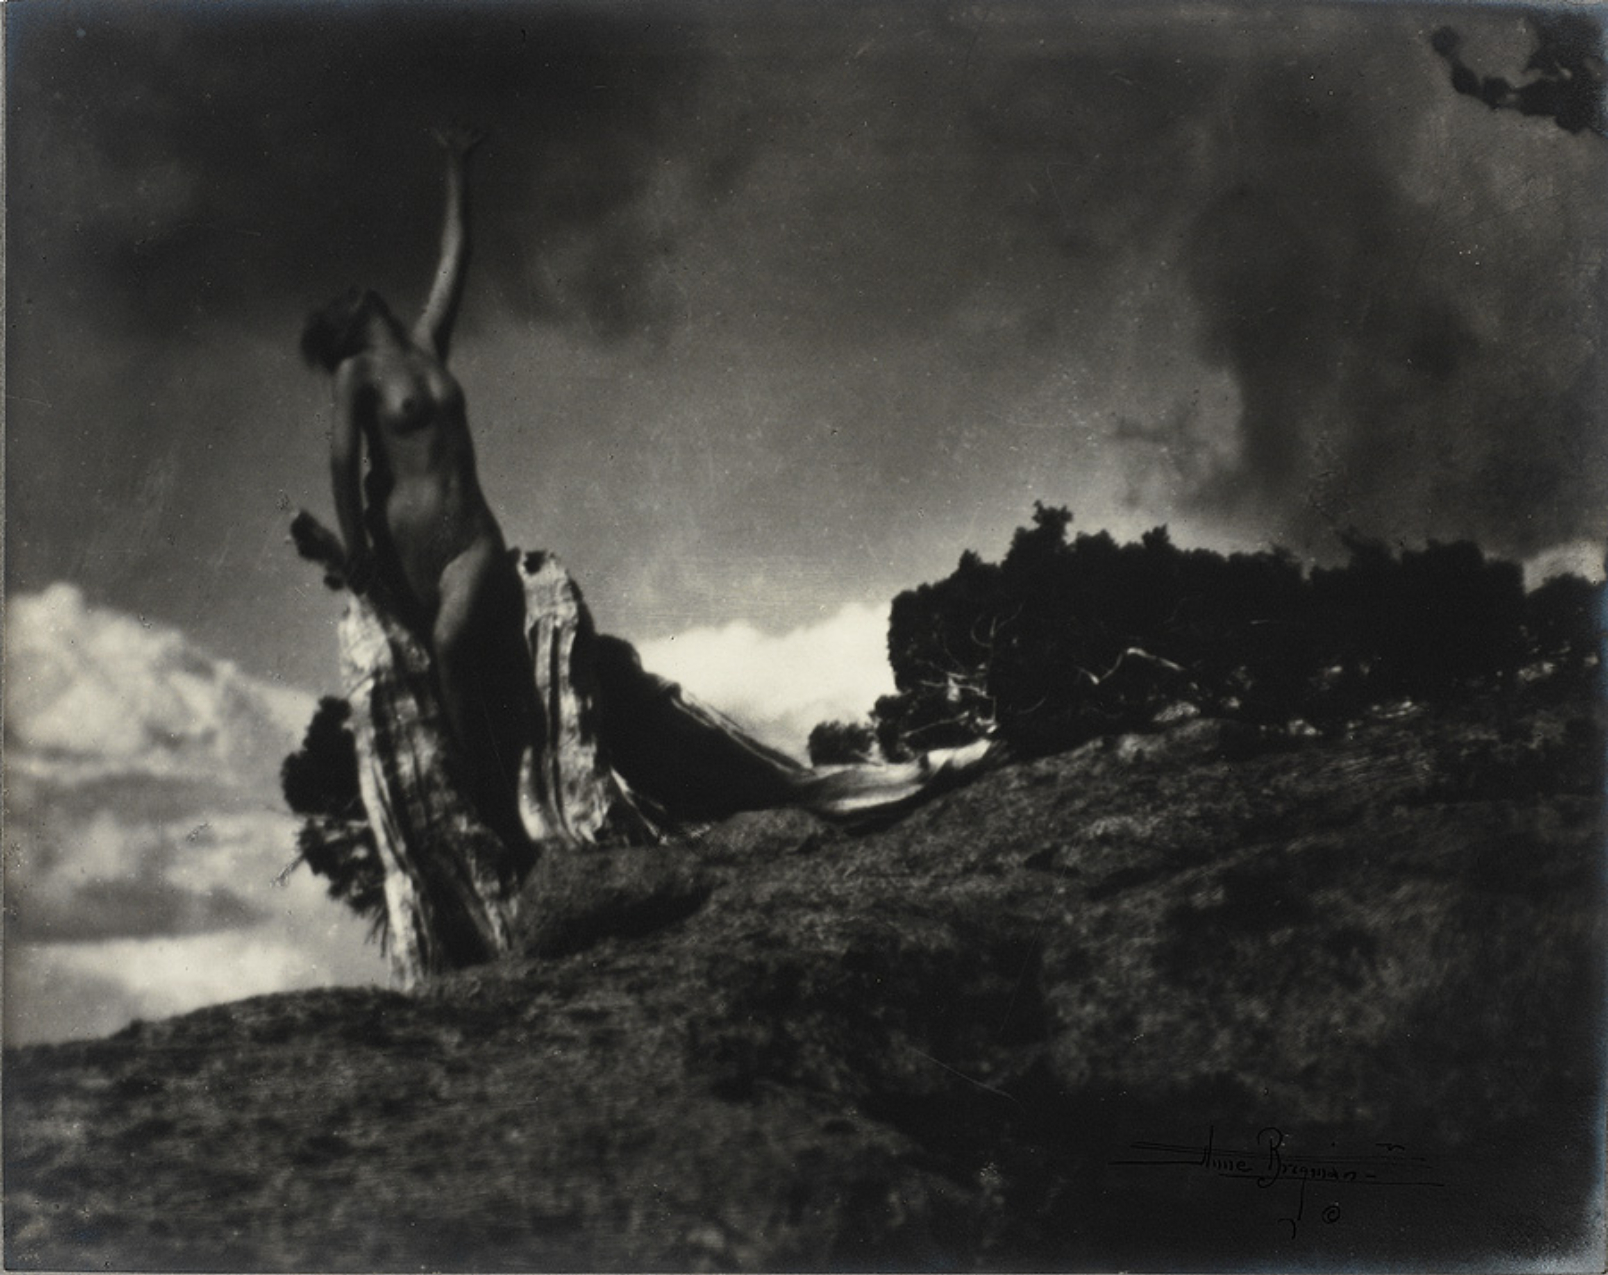 Dark, cloudy sky, irregular ground with small scrubby trees across right center to right edge image, weathered tree trunk mid left with nude woman, head back, proper left arm reaching for the sky.